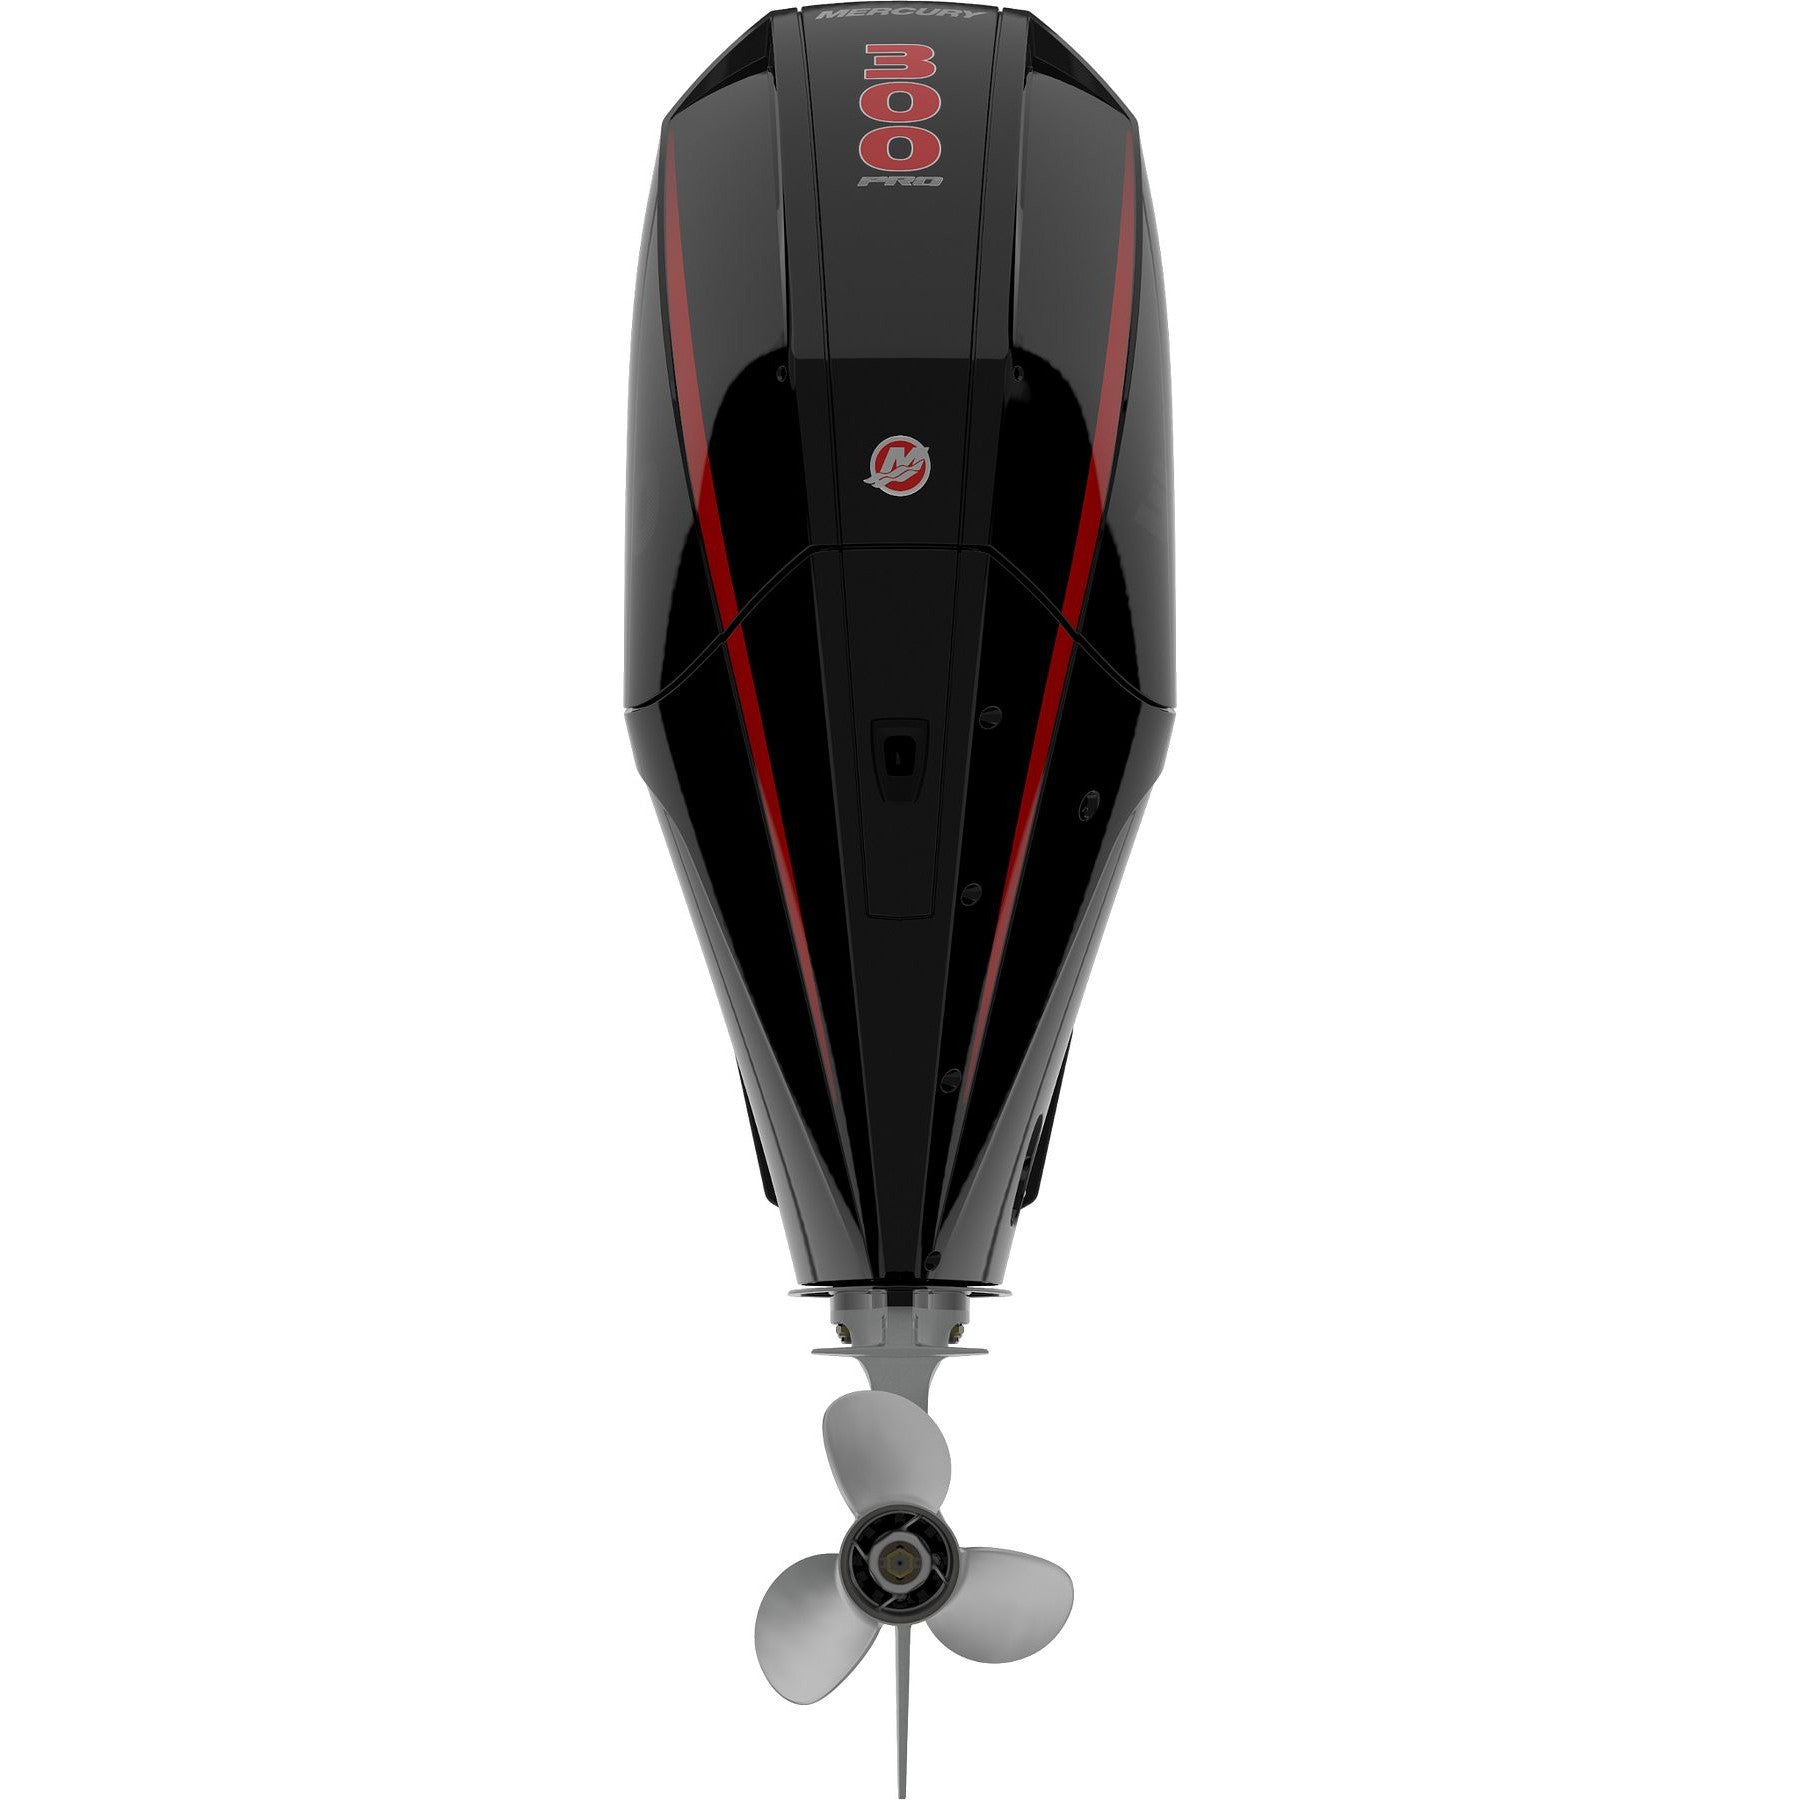 Pro XS 300HP Outboard